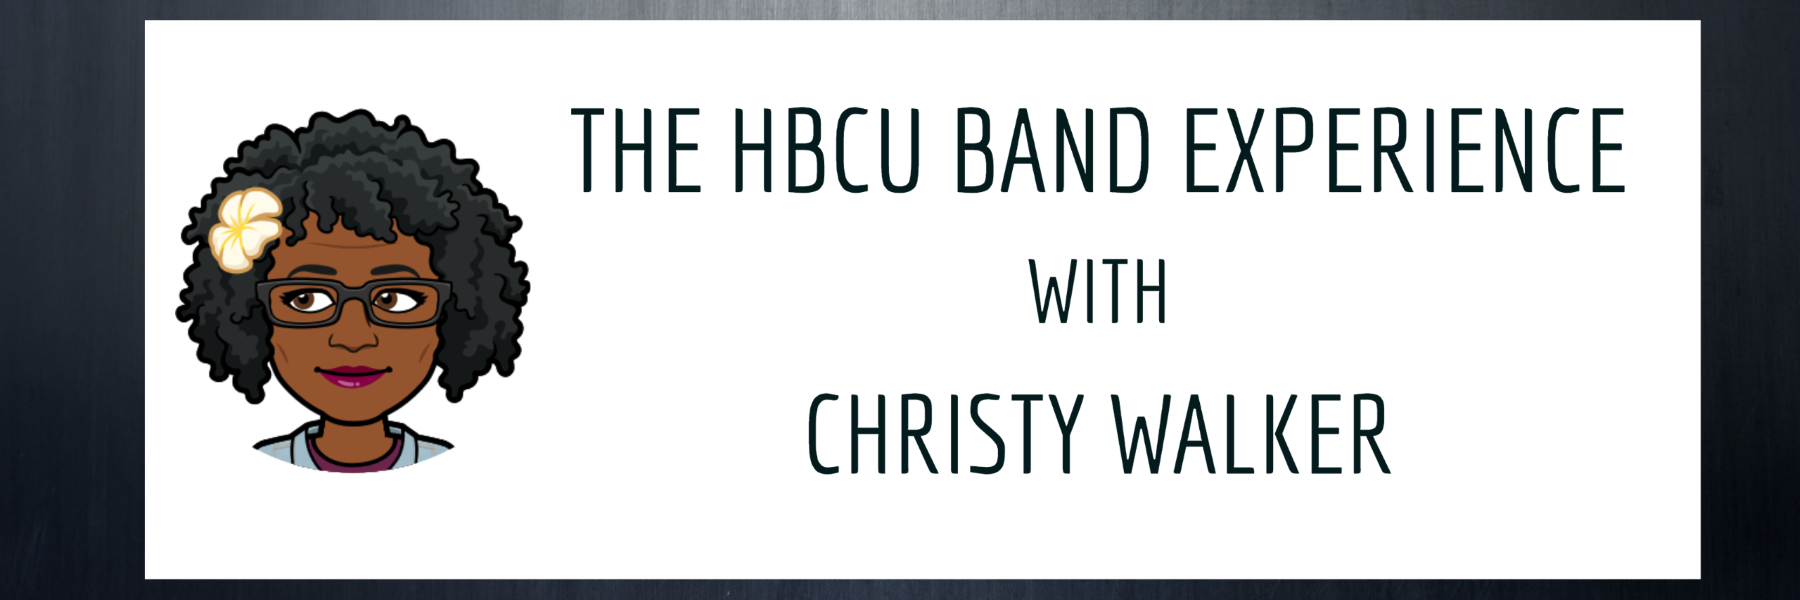 The HBCU Band Experience with Christy Walker